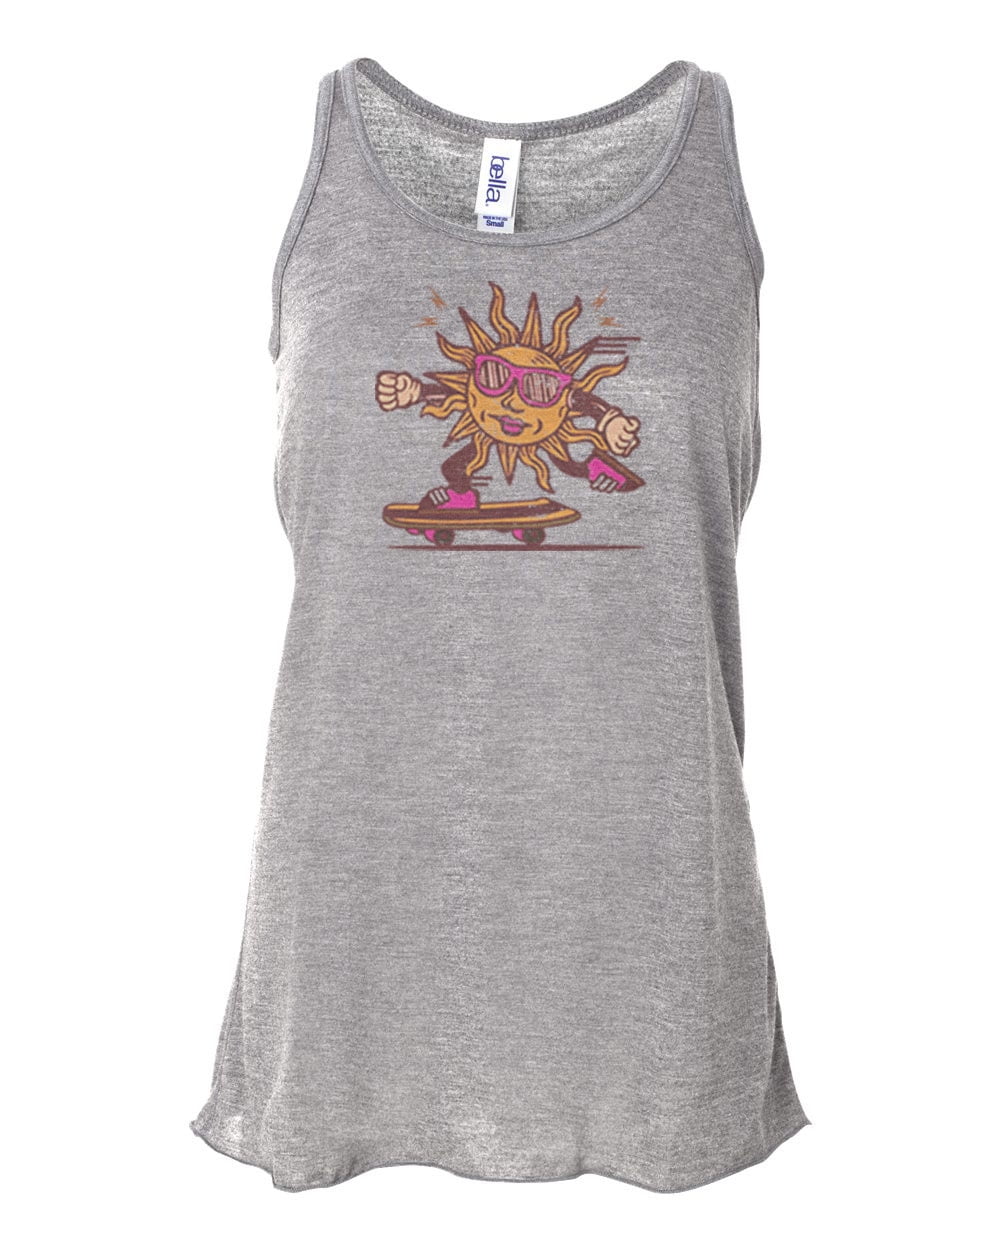 Women's Vintage Tank Top, Sun Skate, Retro Tank, Racerback, Soft Canvas, Gift For Her, Funny Shirts, Skateboard Shirt, Skating, Athletic Grey, SMALL" -